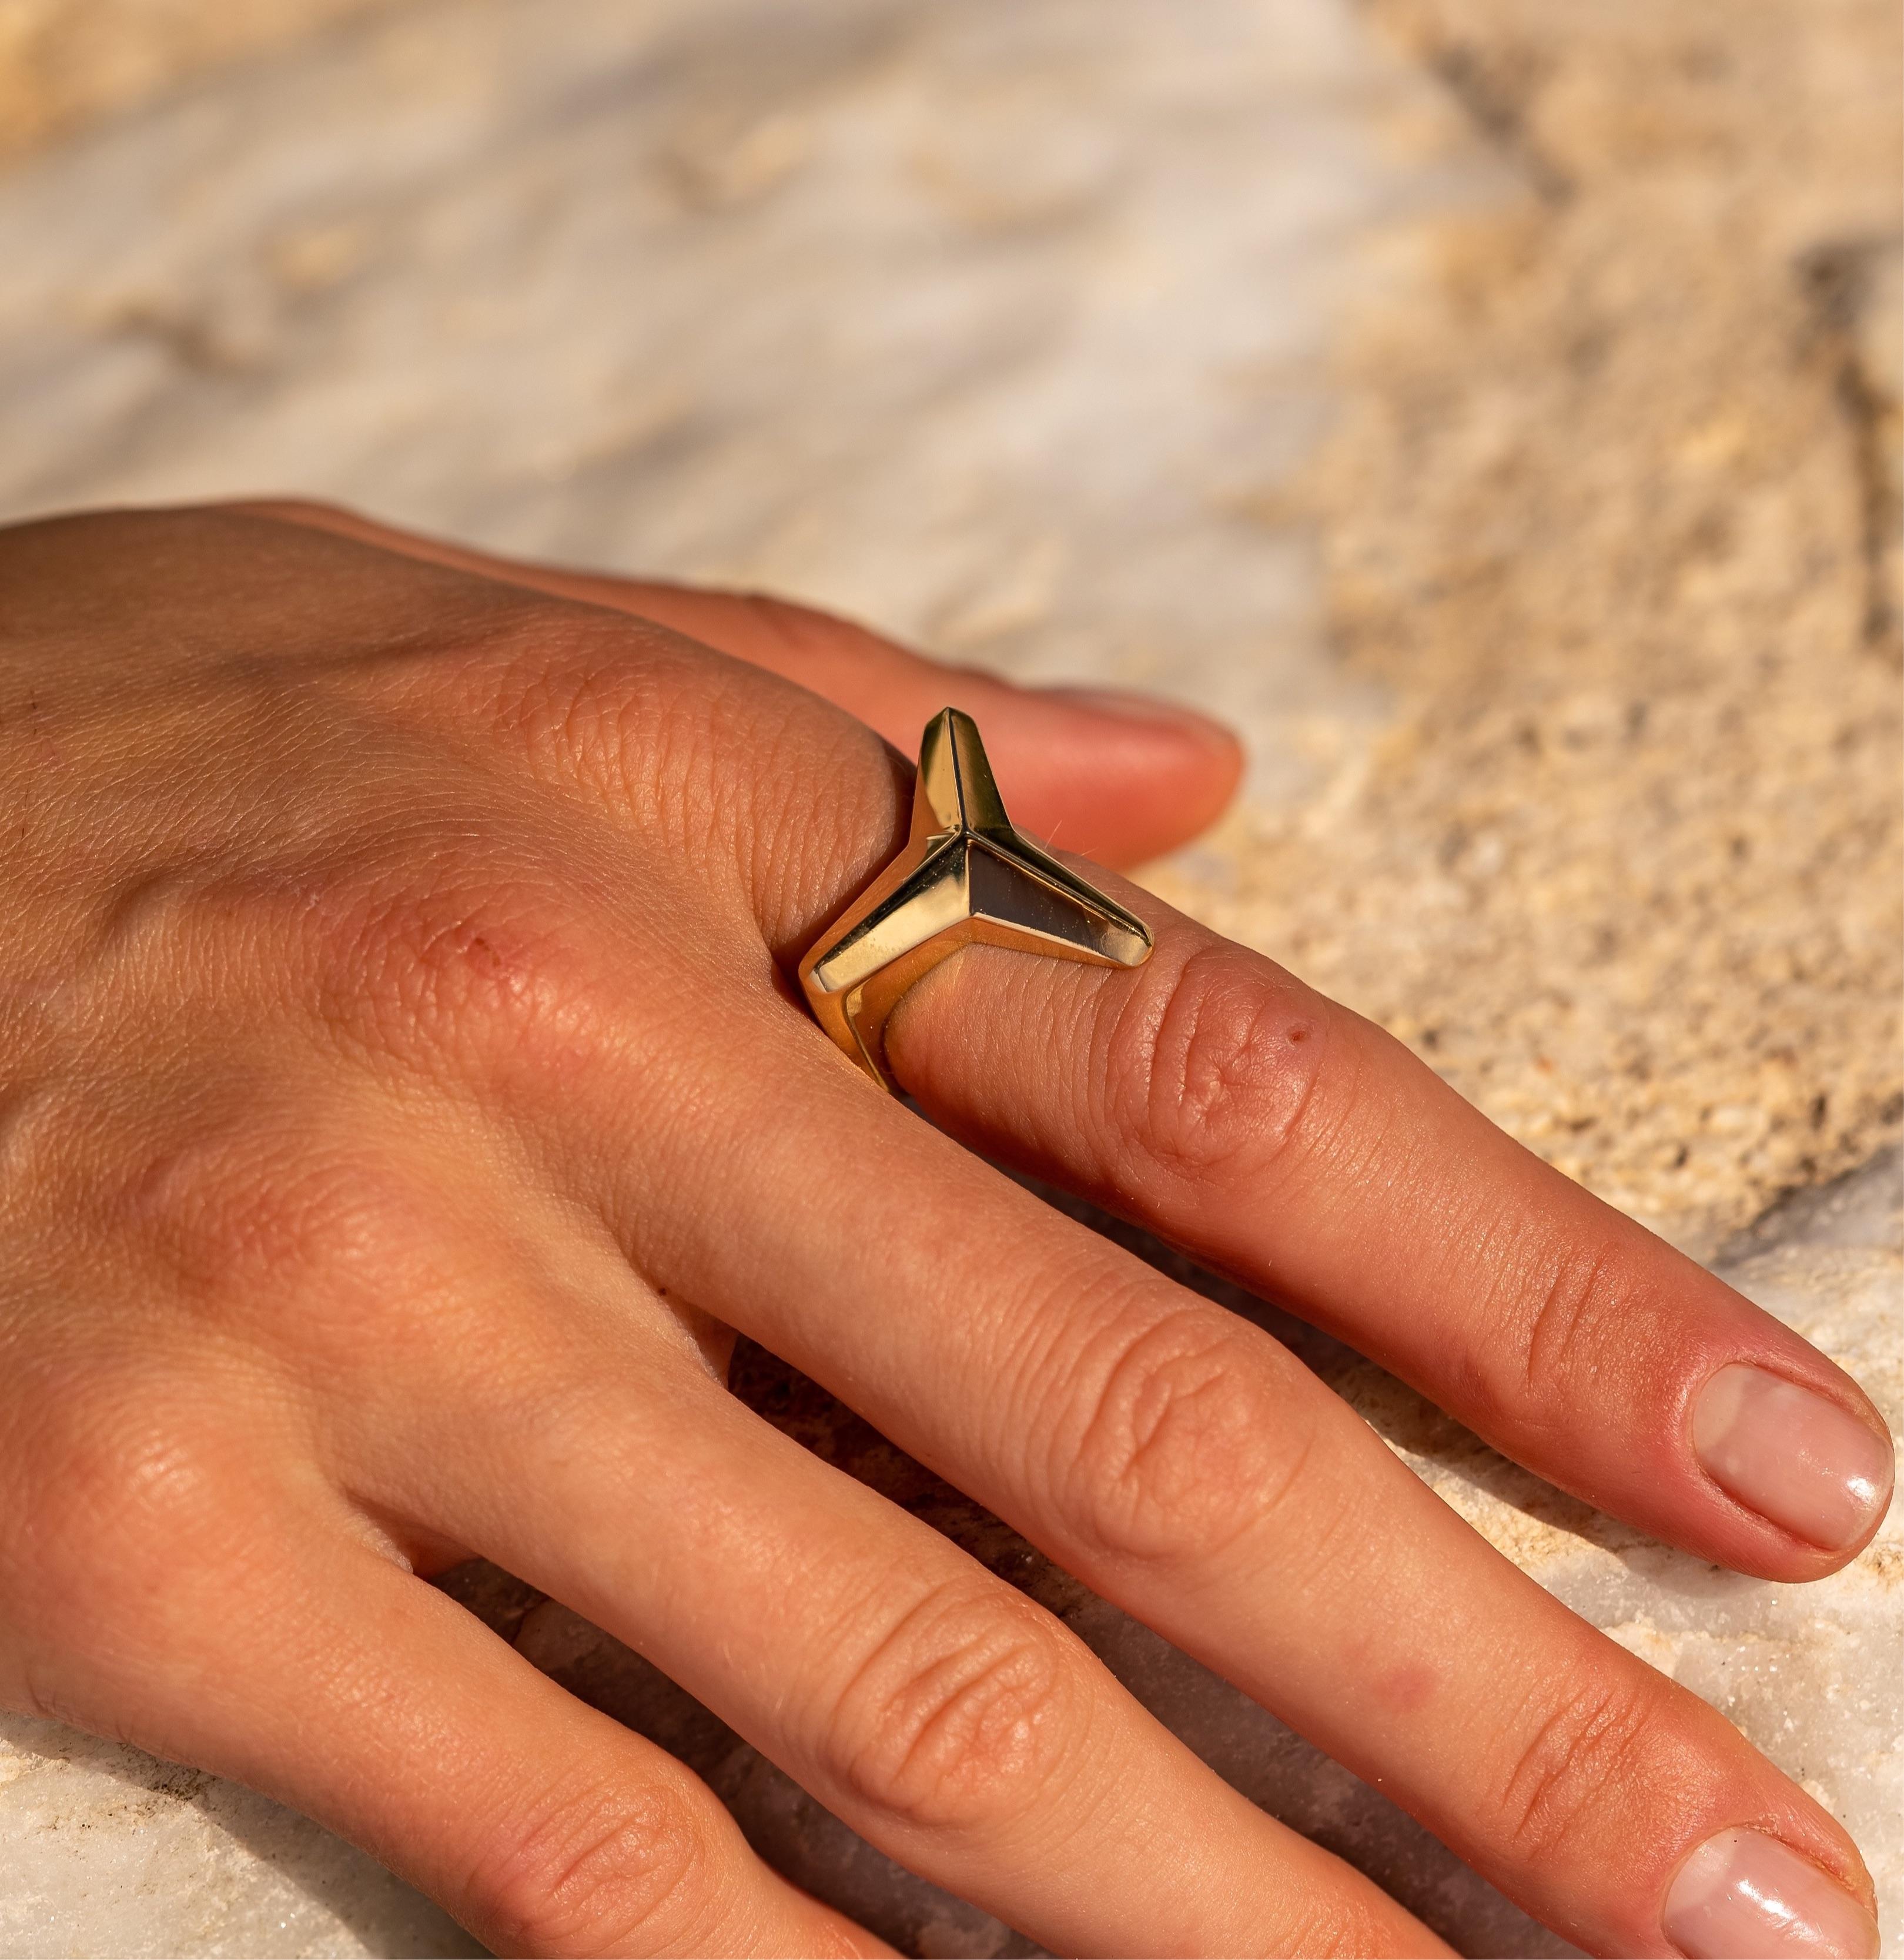 The stunning Three pointed star ring is made of 18K yellow gold and is hallmarked in Cyprus. This highly polished finish ring is the perfect balance of style and comfort. It will look equally great worn as a ring on the pointer or middle finger and